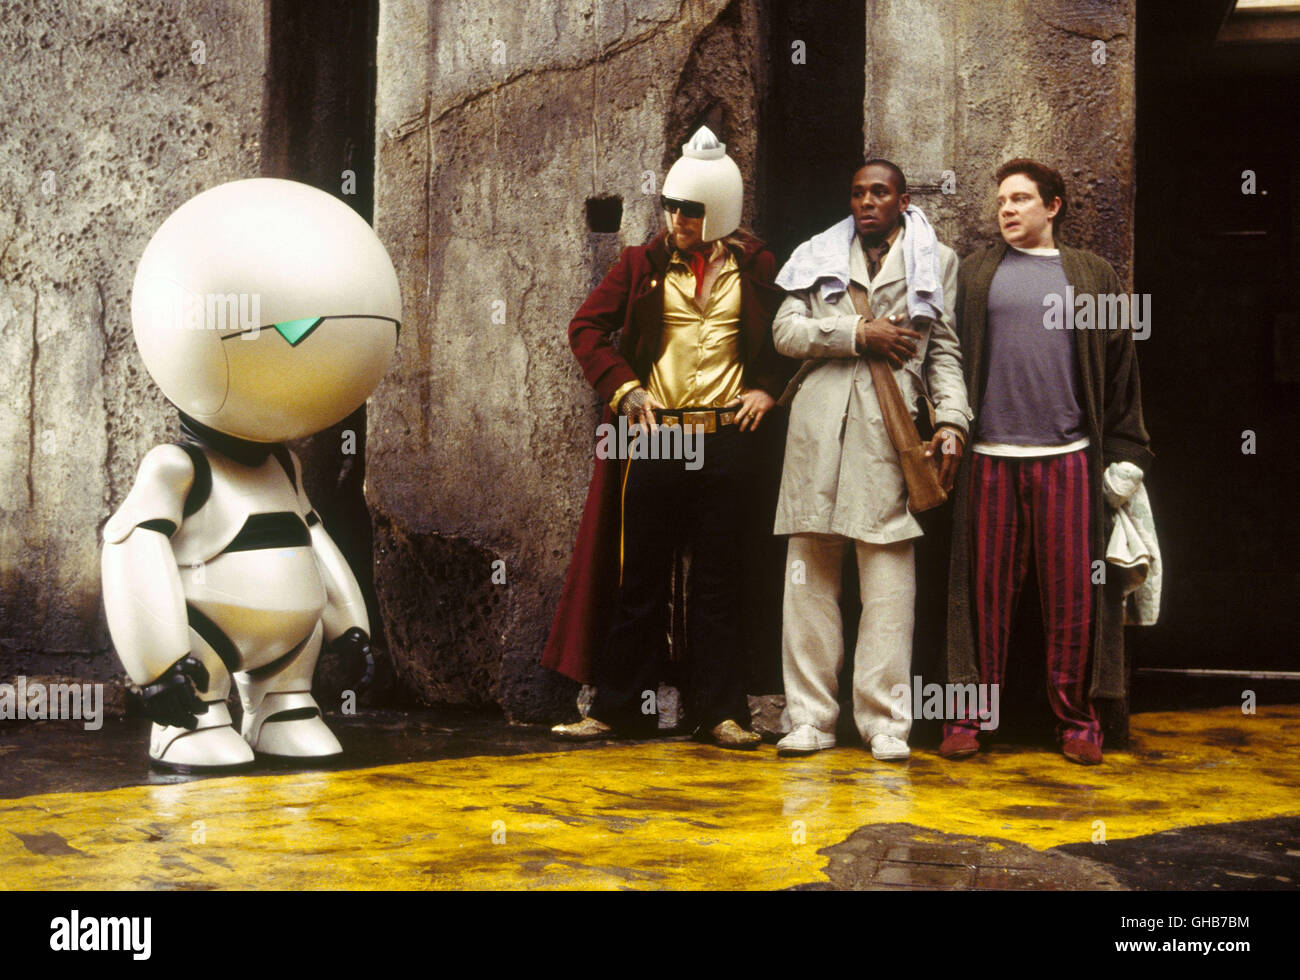 PER ANHALTER DURCH DIE GALAXIS Hitchhikers Guide to Galaxy USA/UK 2005  Garth Jennings Marvin (WARWICK DAVIS, voice by ALAN RICKMAN), Zaphod (SAM  ROCKWELL), Ford (MOS DEF), Arthur (MARTIN FREEMAN) attempt to gather